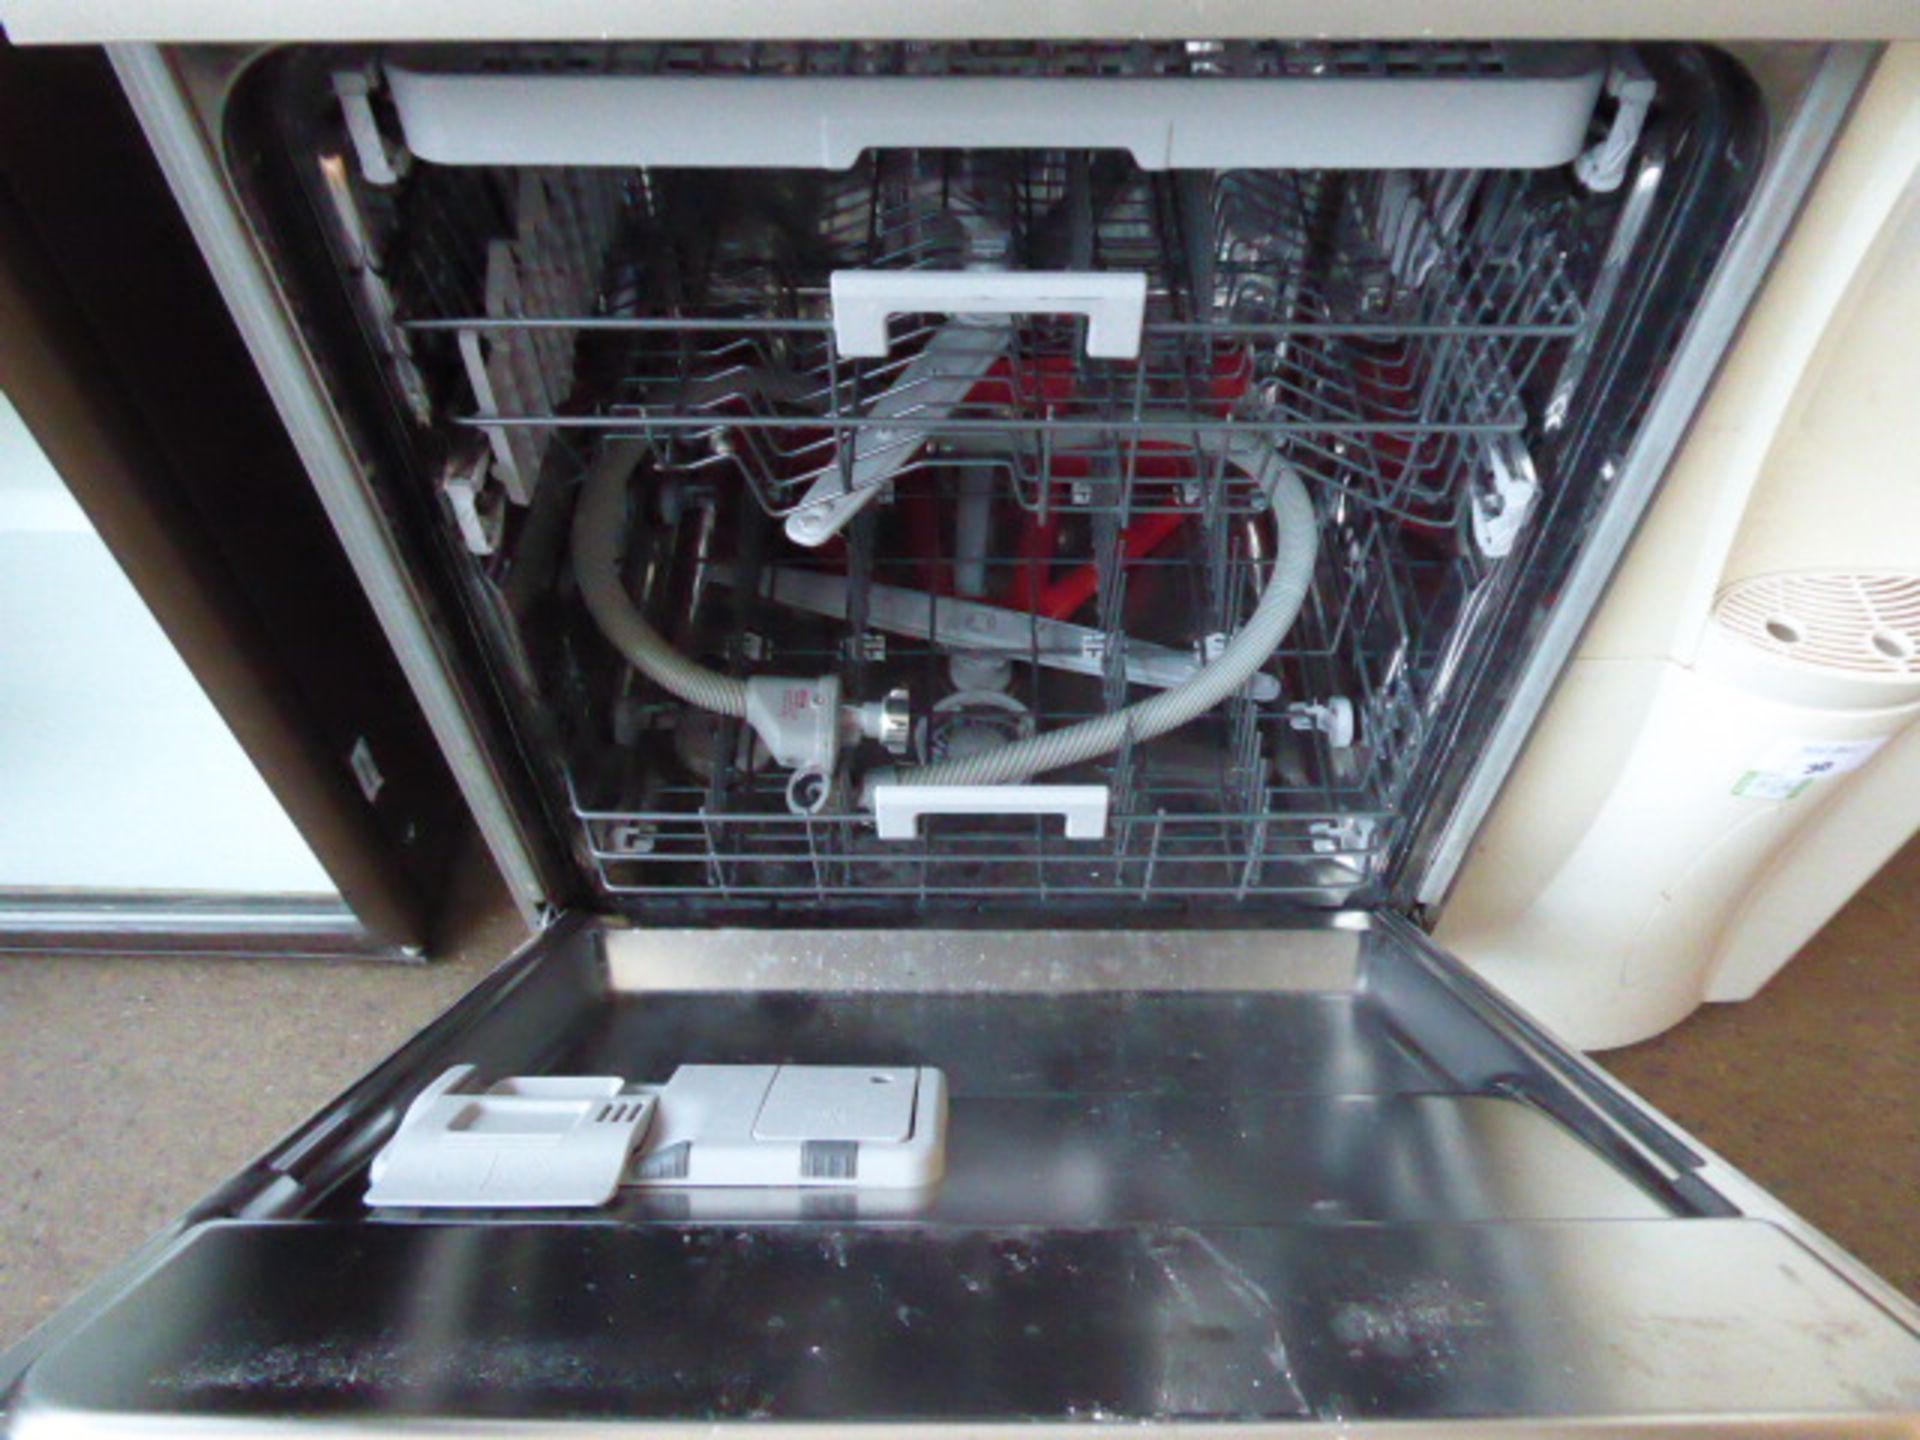 Maytag under counter dish washer - Image 2 of 2